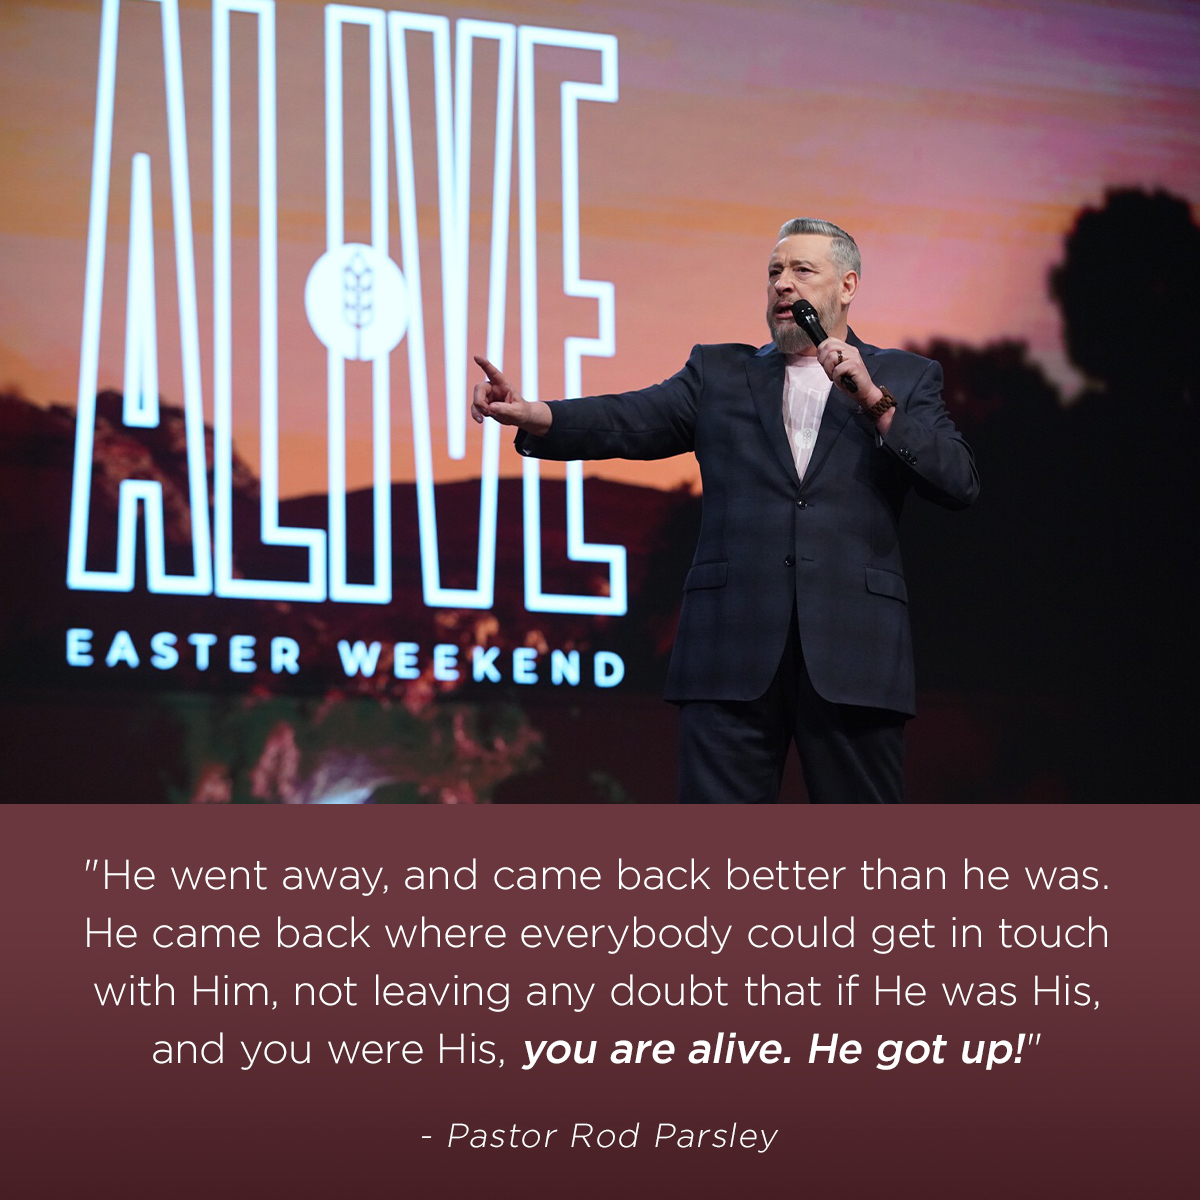 “He went away, and came back better than he was. He came back where everybody could get in touch with Him, not leaving any doubt that if He was His, and you were His, you are alive. He got up!” – Pastor Rod Parsley